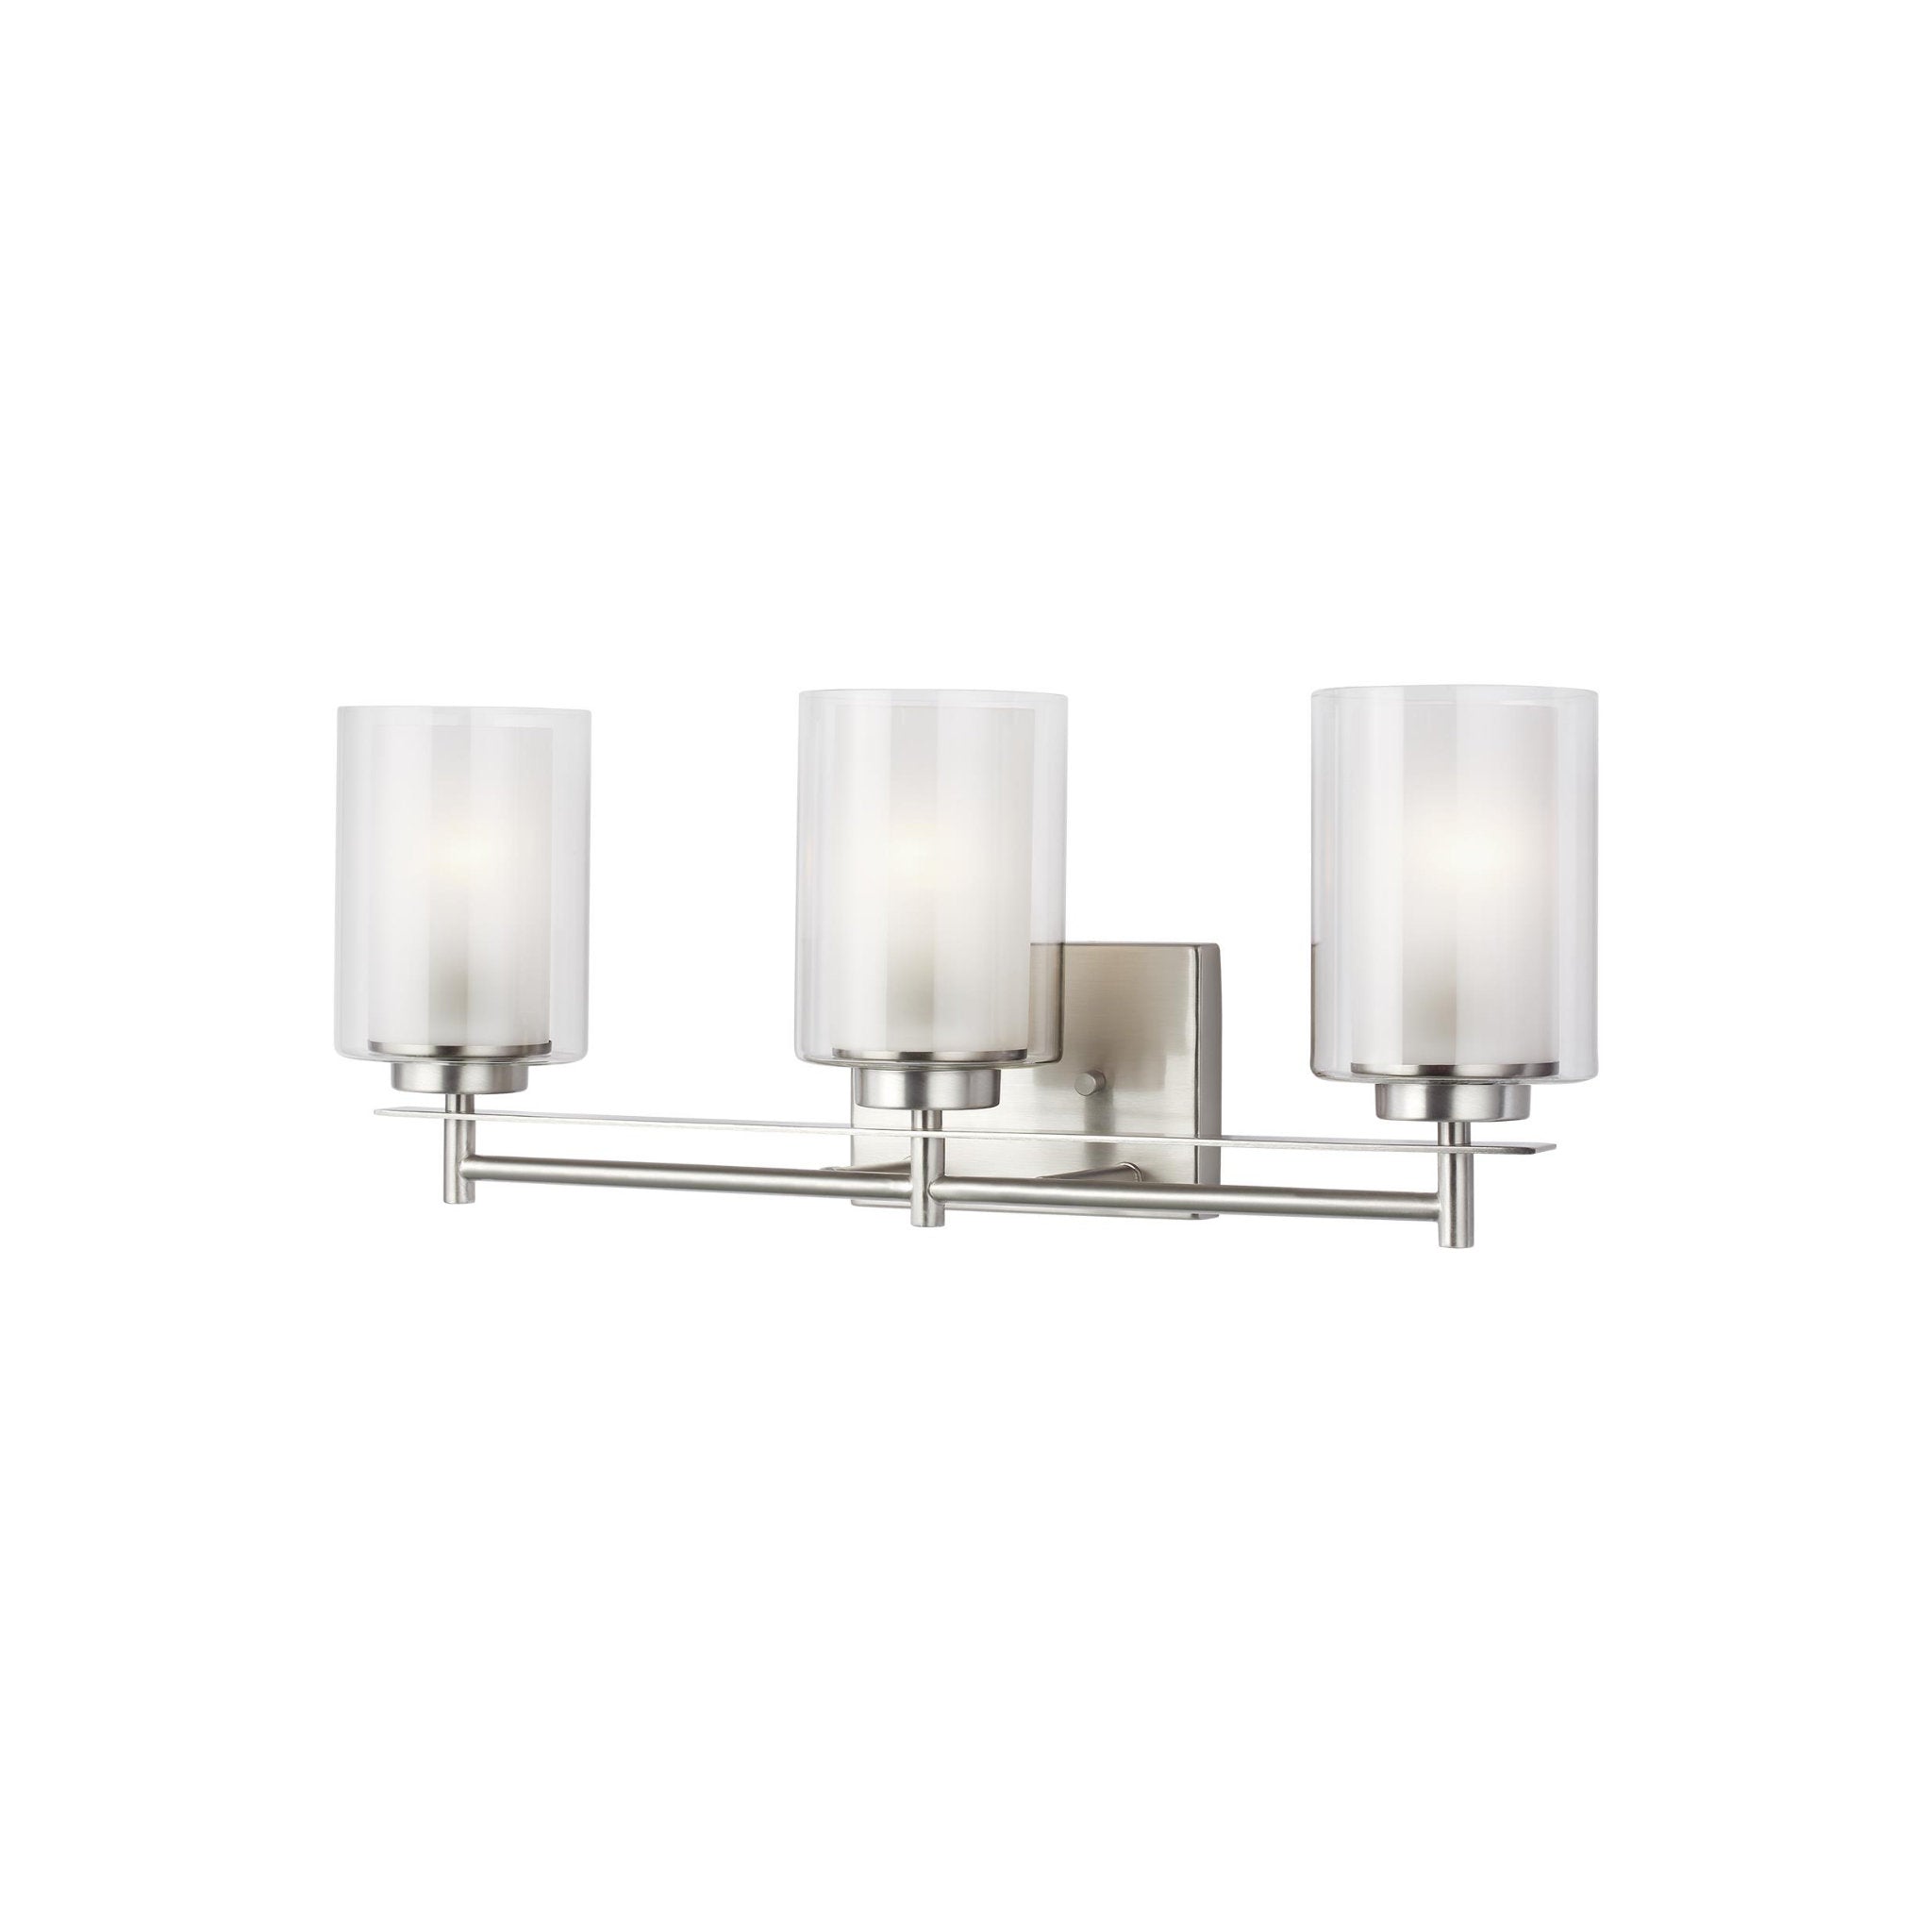 Elmwood Park Three Light Bath Traditional Wall Fixture 22.25" Width 8.5" Height Steel Round Satin Etched Shade in Brushed Nickel